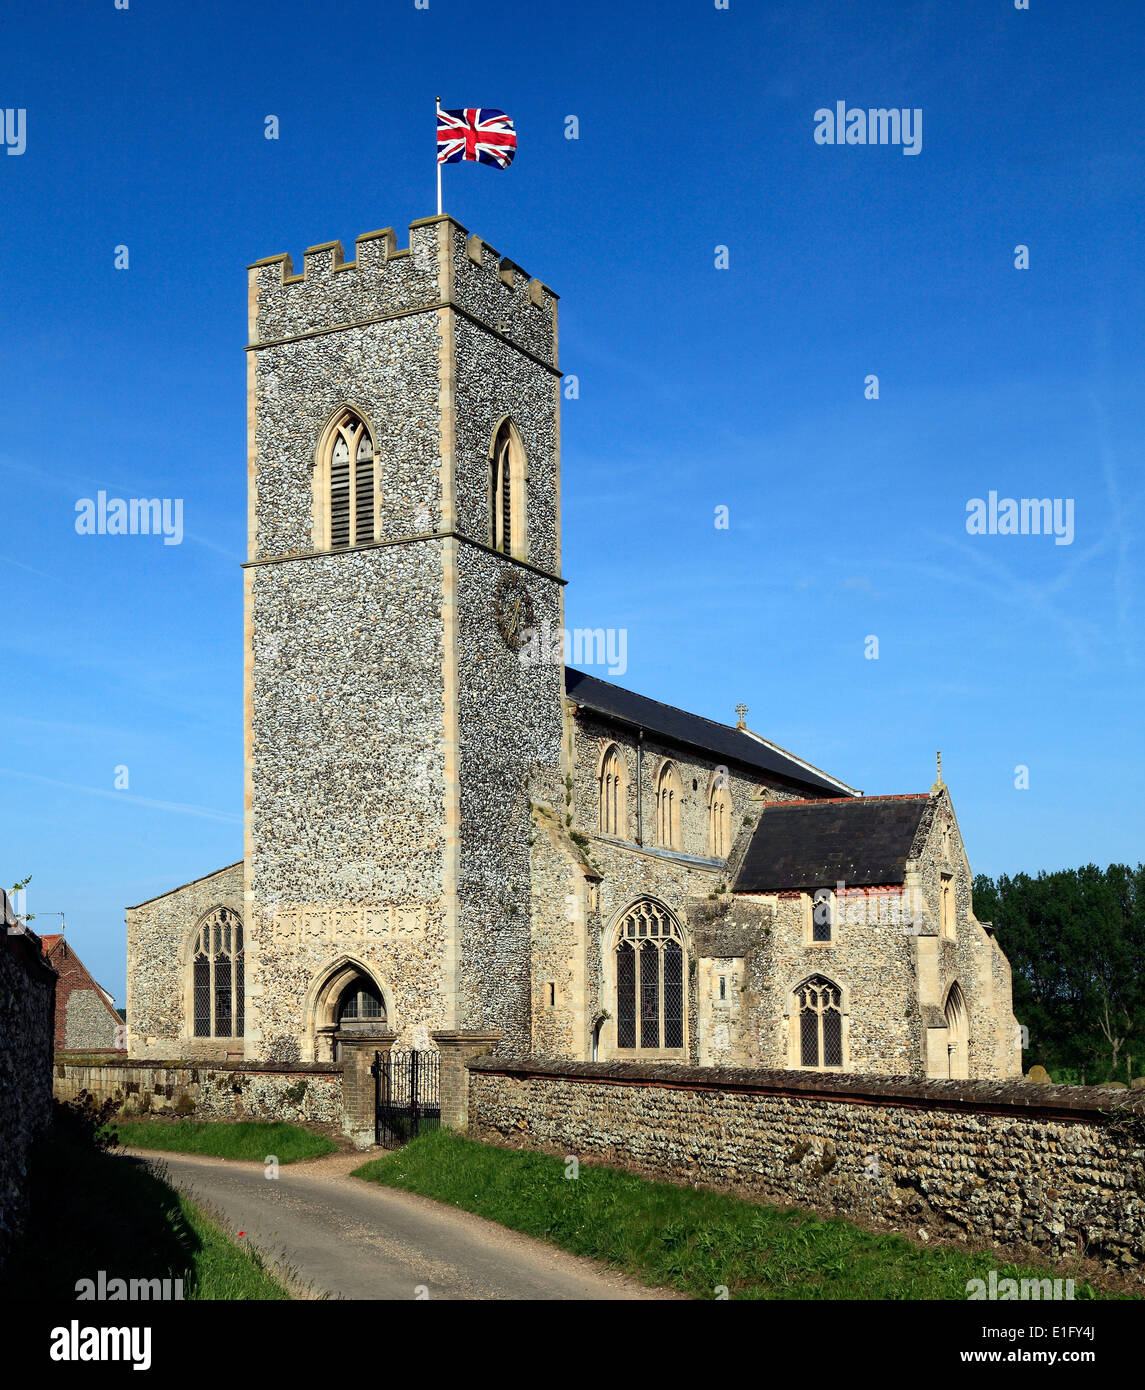 English Medieval church, Union Jack Flag, Wighton, Norfolk England UK English churches tower towers flying flags Stock Photo